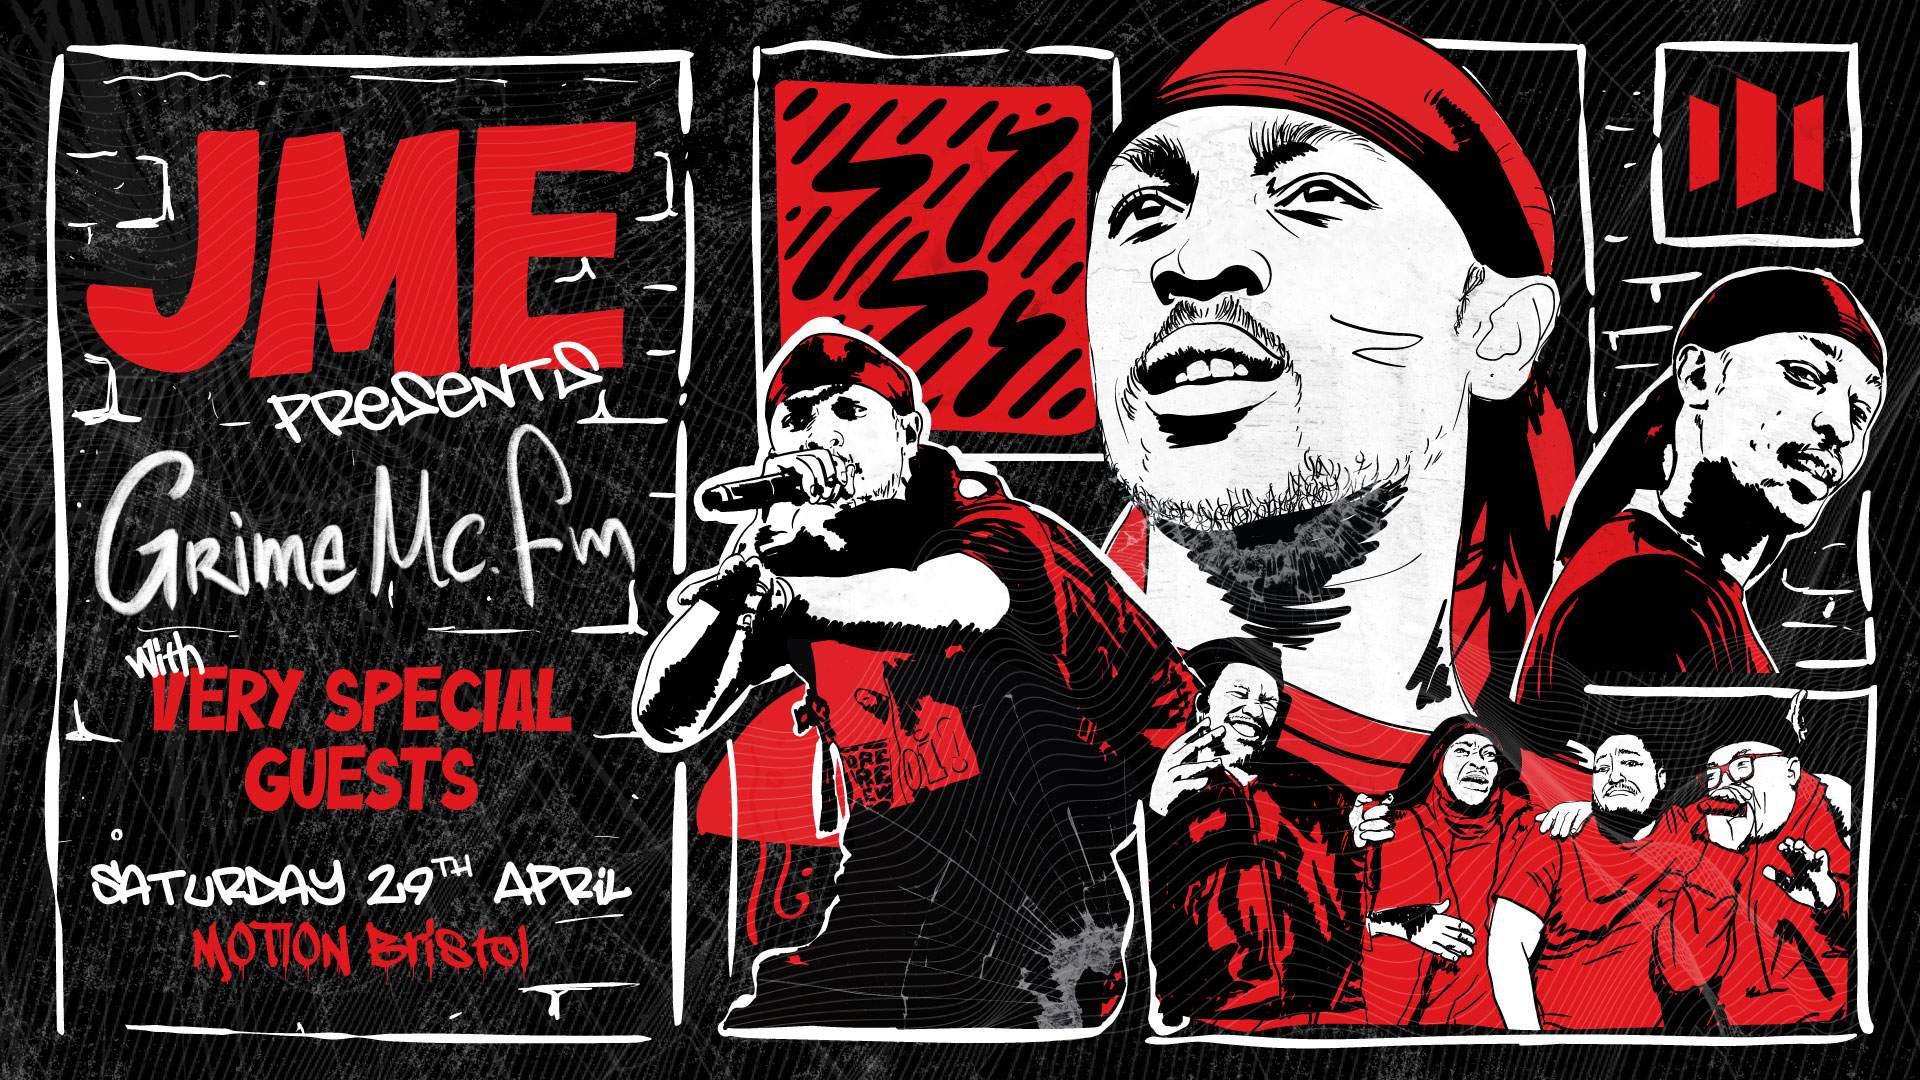 JME presents Grime MC FM with Very Special Guests (SOLD OUT) - Página trasera